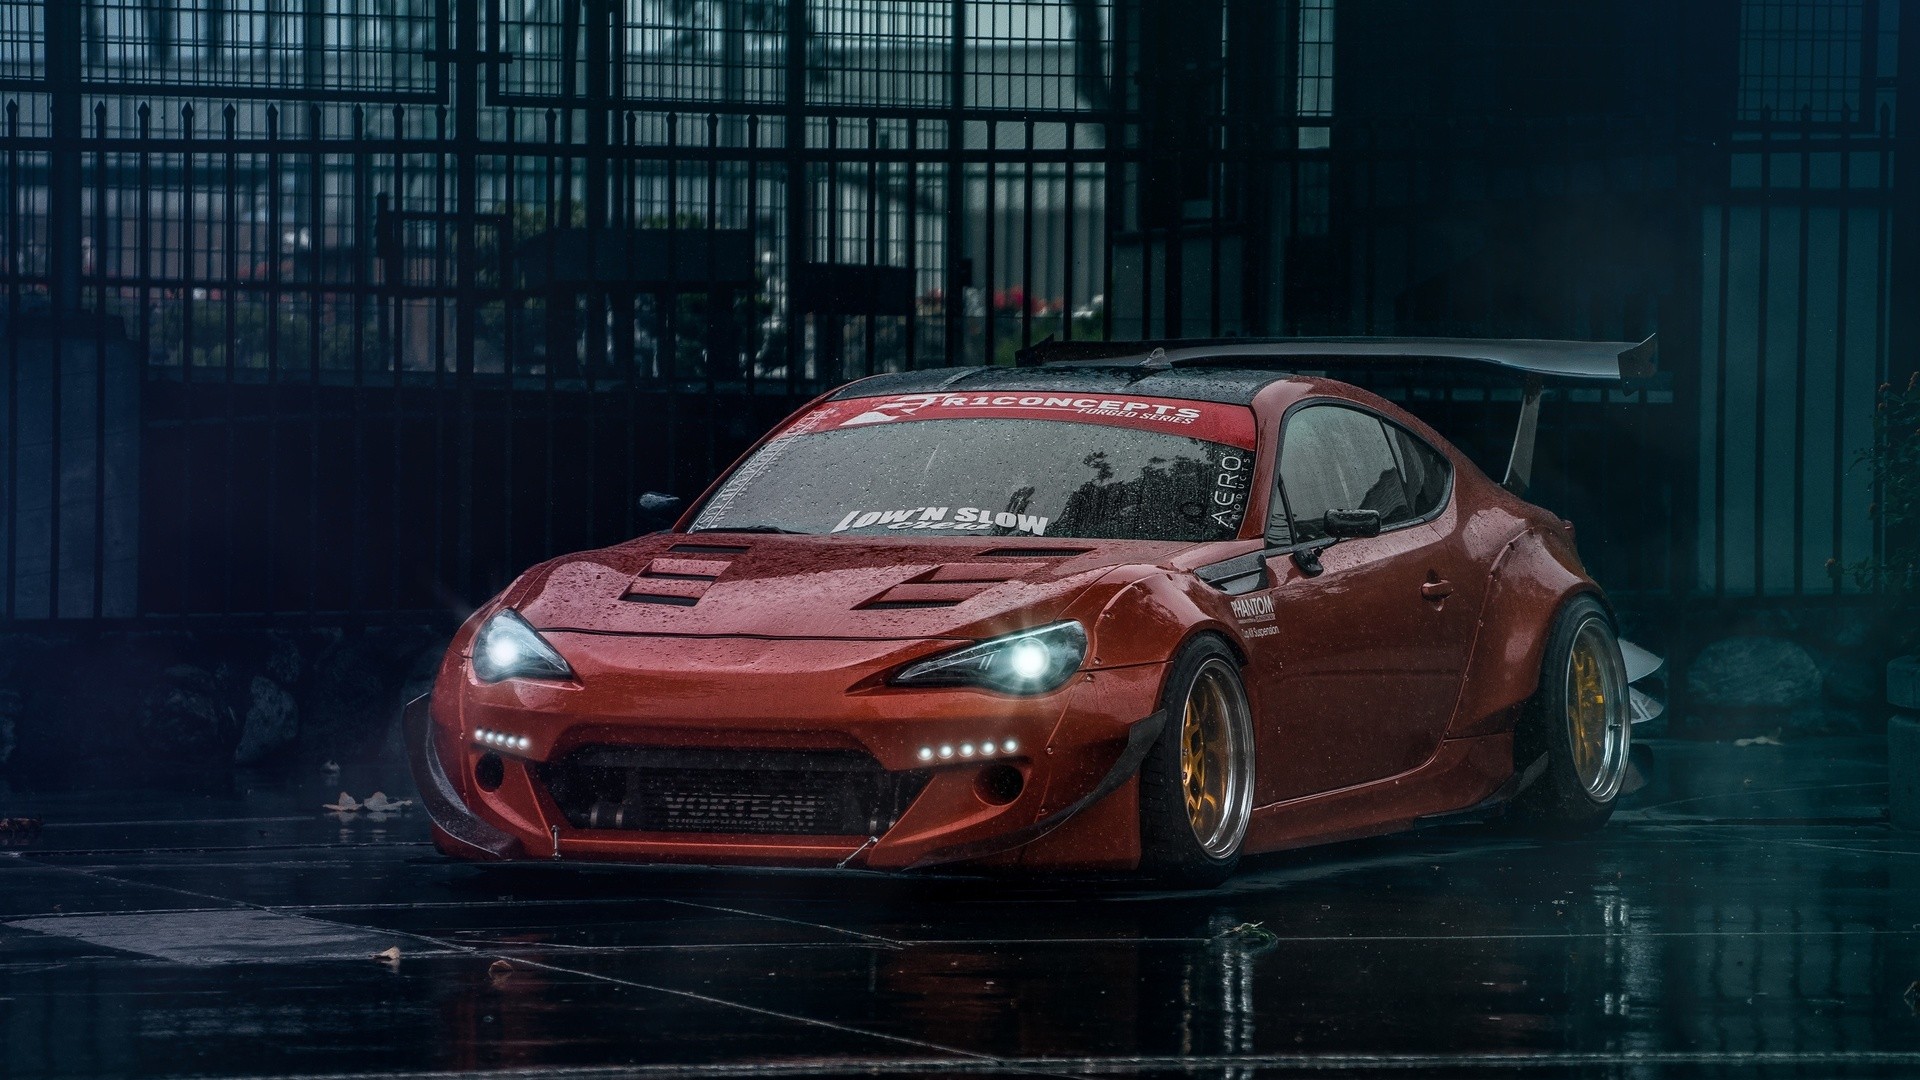 car, Toyota, Tuning, Scion FR S, Subaru BRZ, Stance, Red Cars Wallpaper